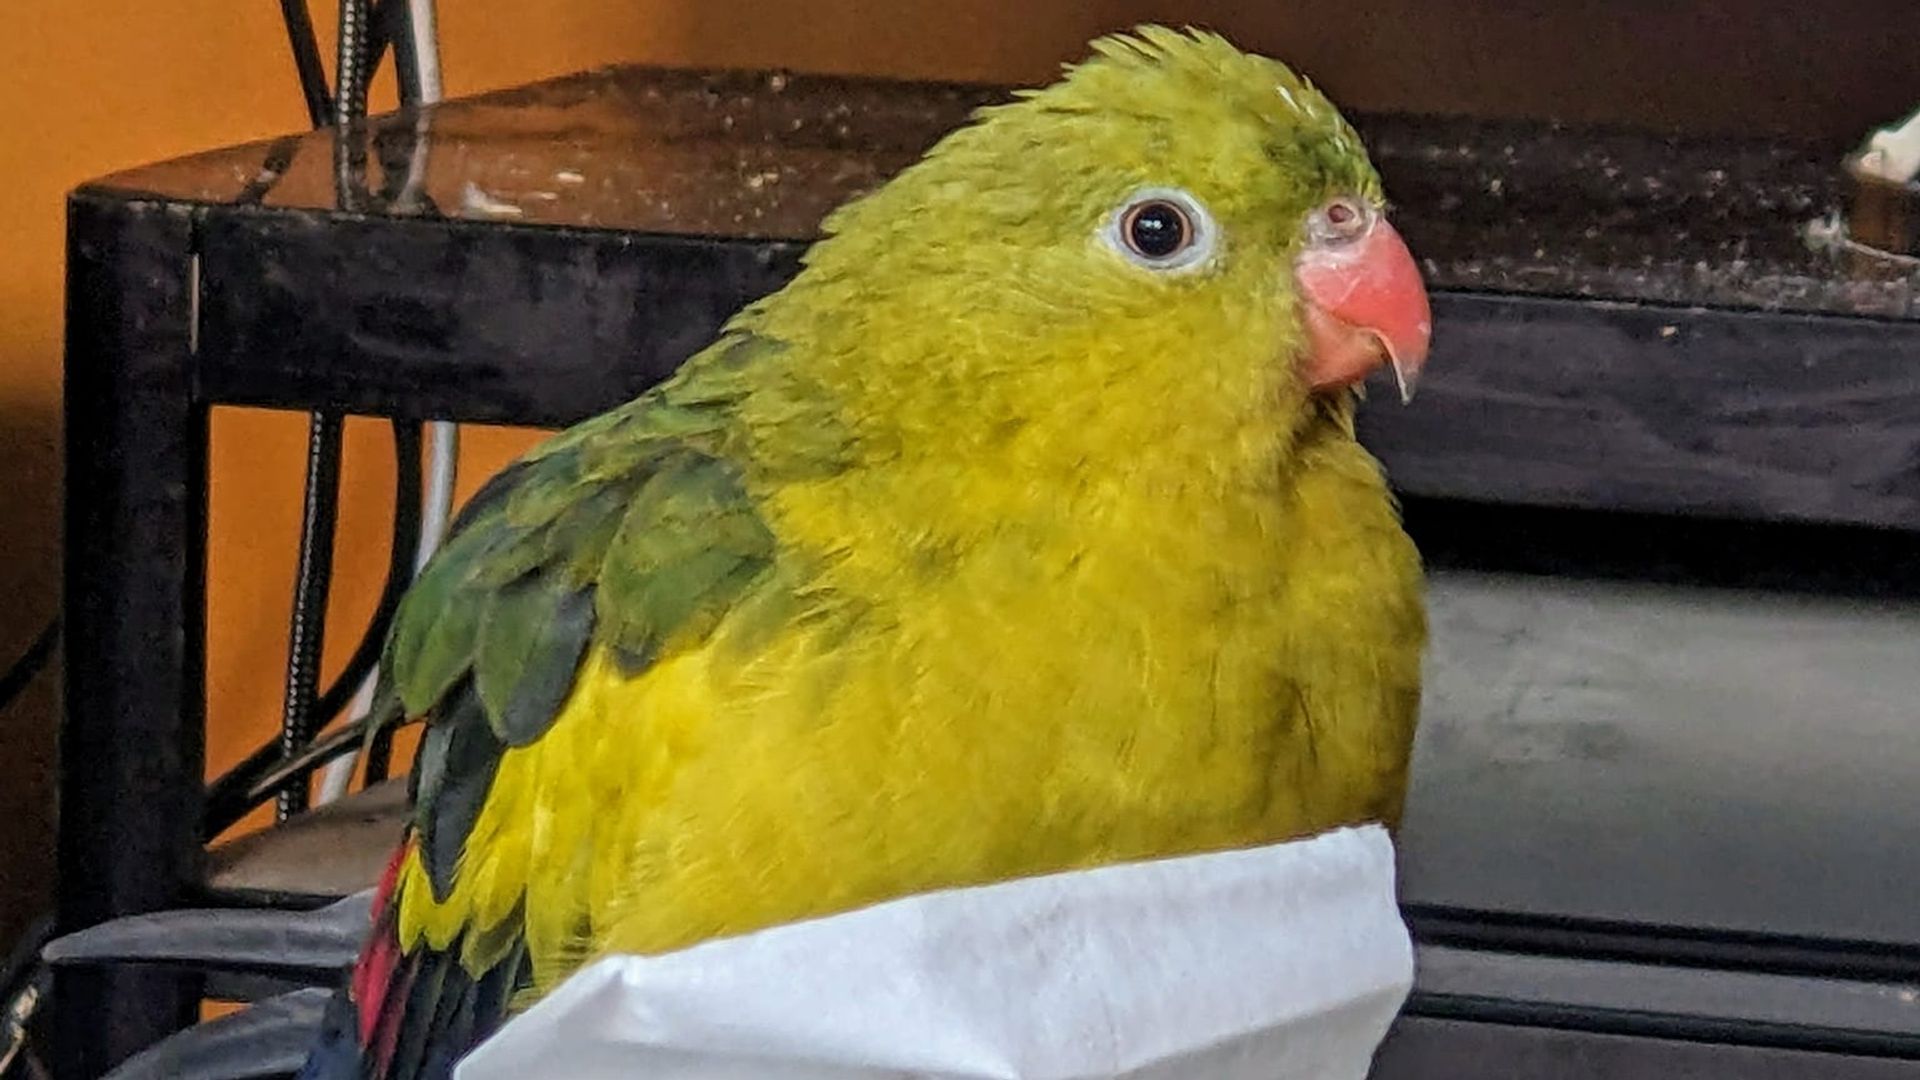 Parrot that escaped home found five miles away after 'wild weekend'